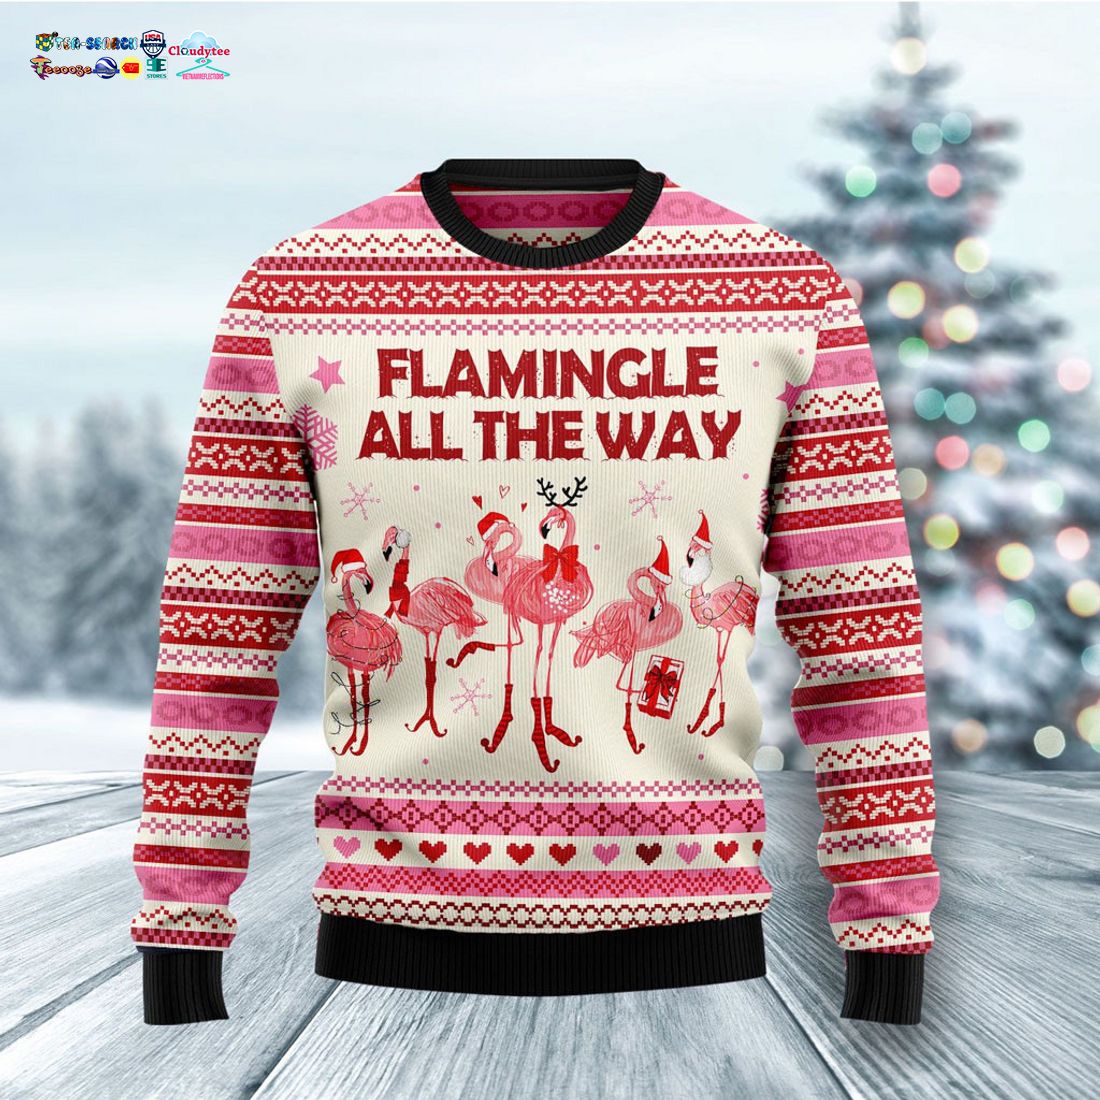 flamingle-all-the-ways-ugly-christmas-sweater-1-v7hzl.jpg